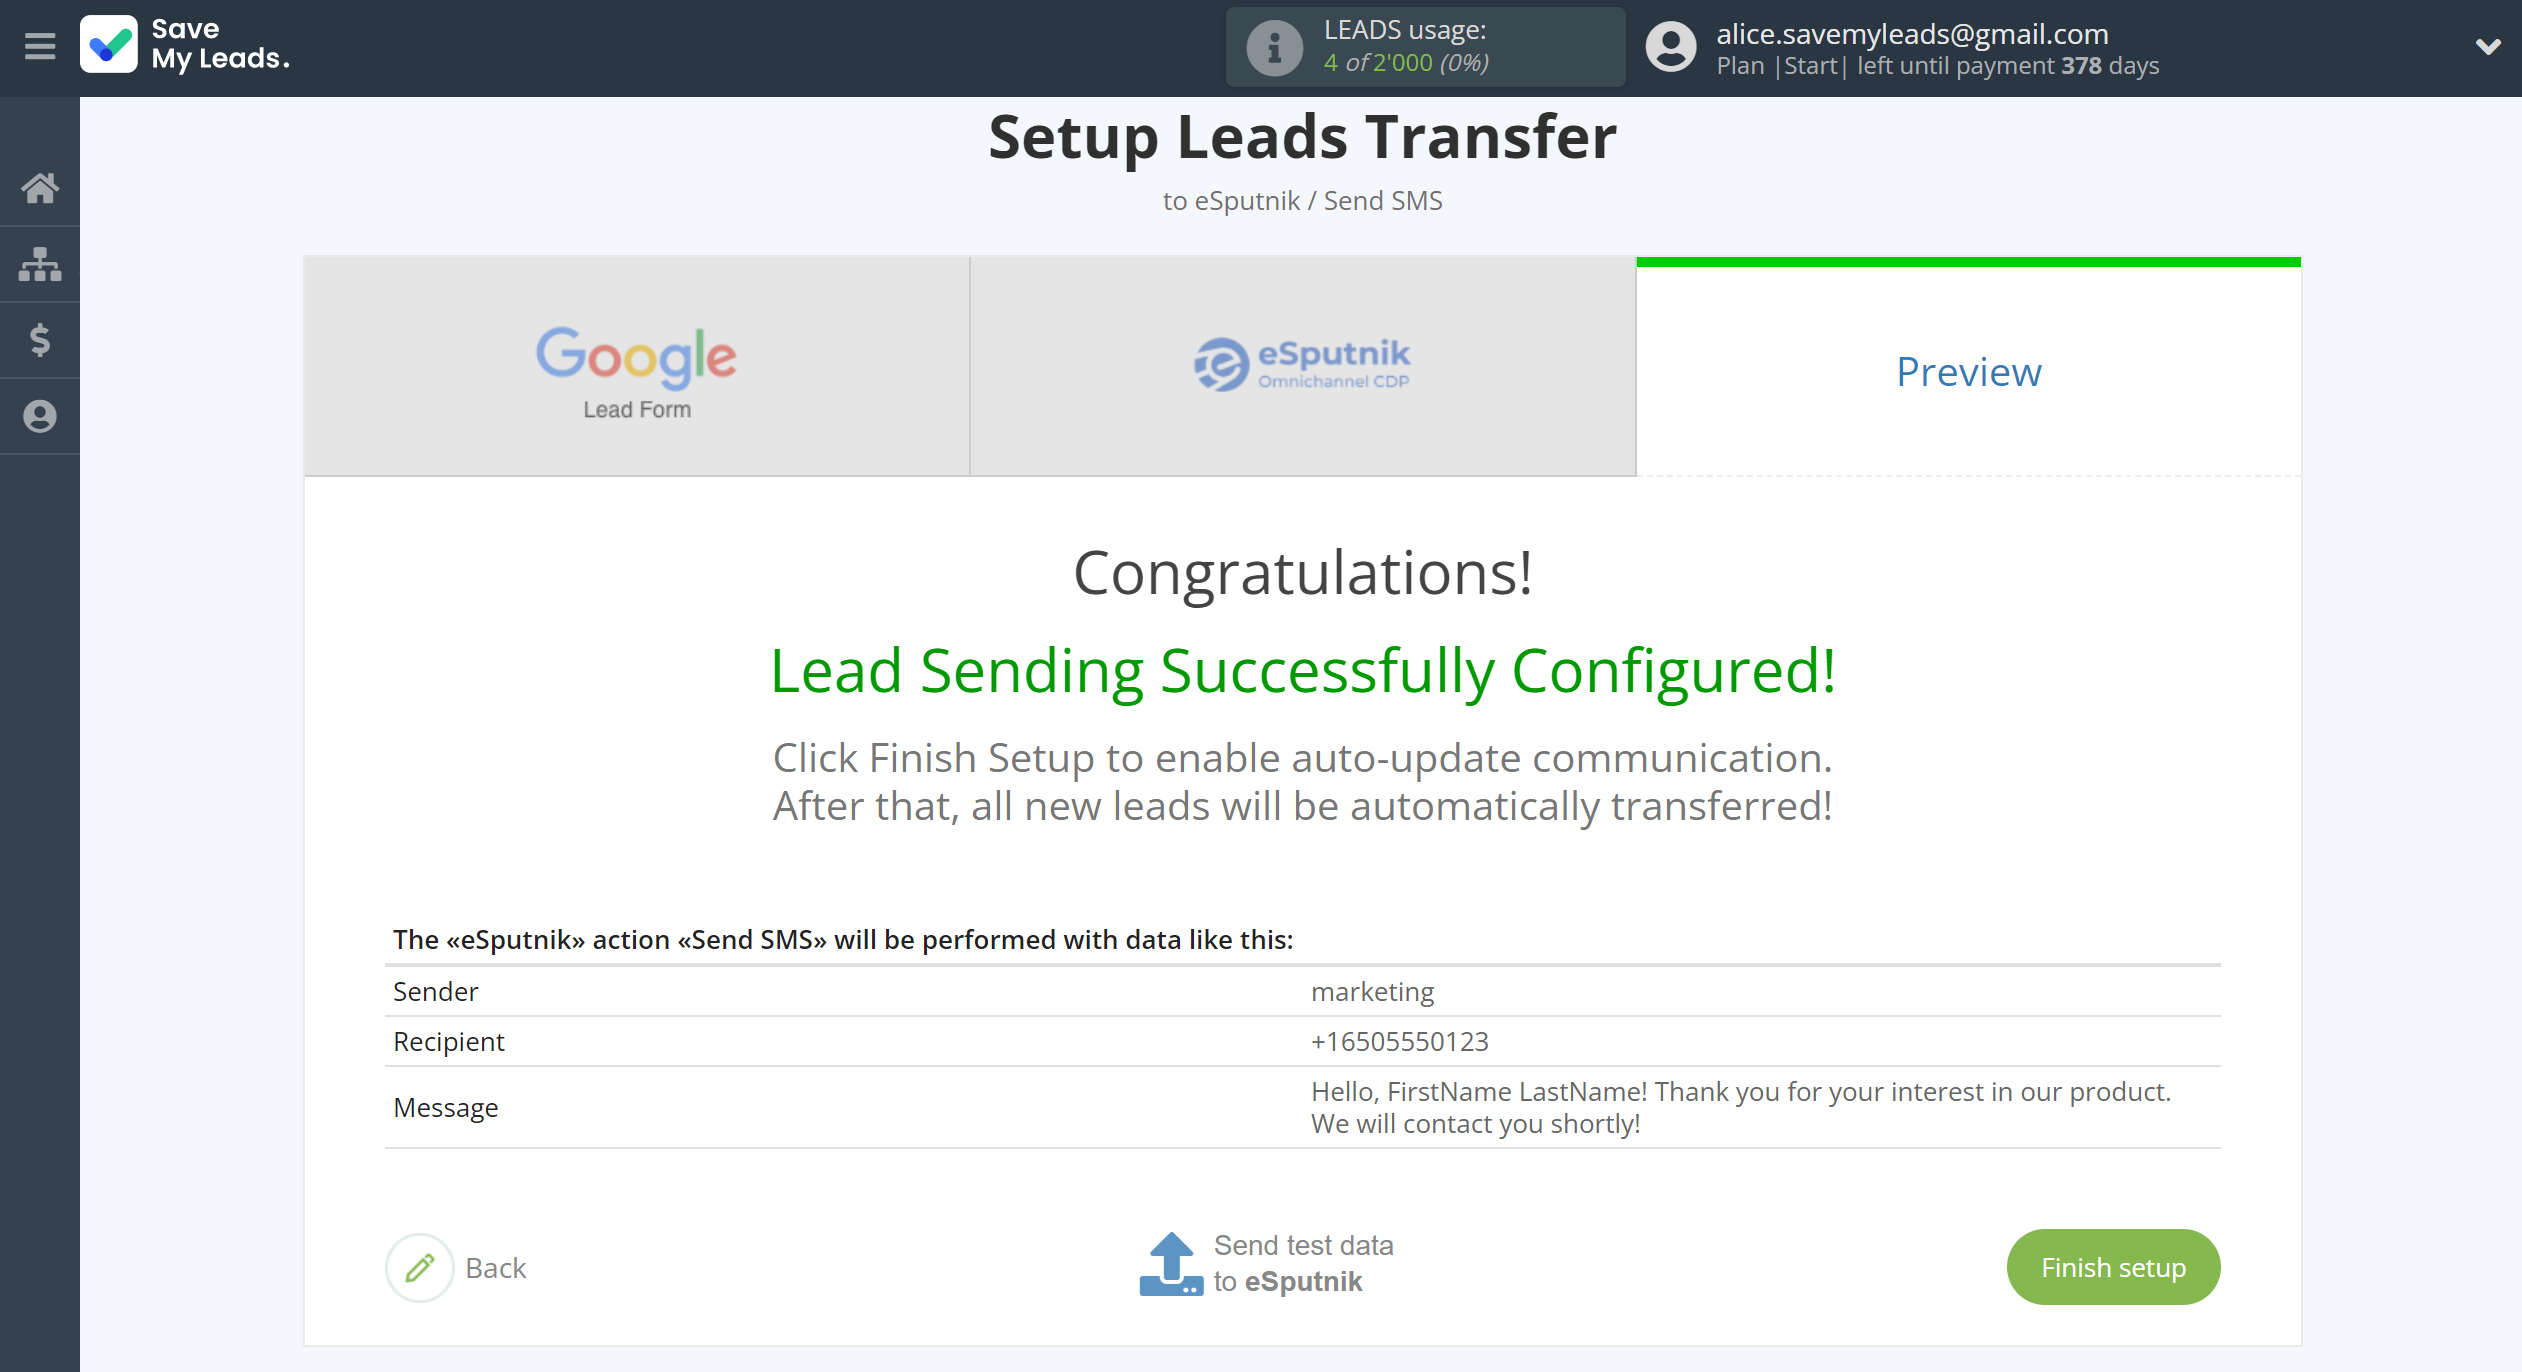 How to Connect Google Lead Form with eSputnik Send SMS | Test data